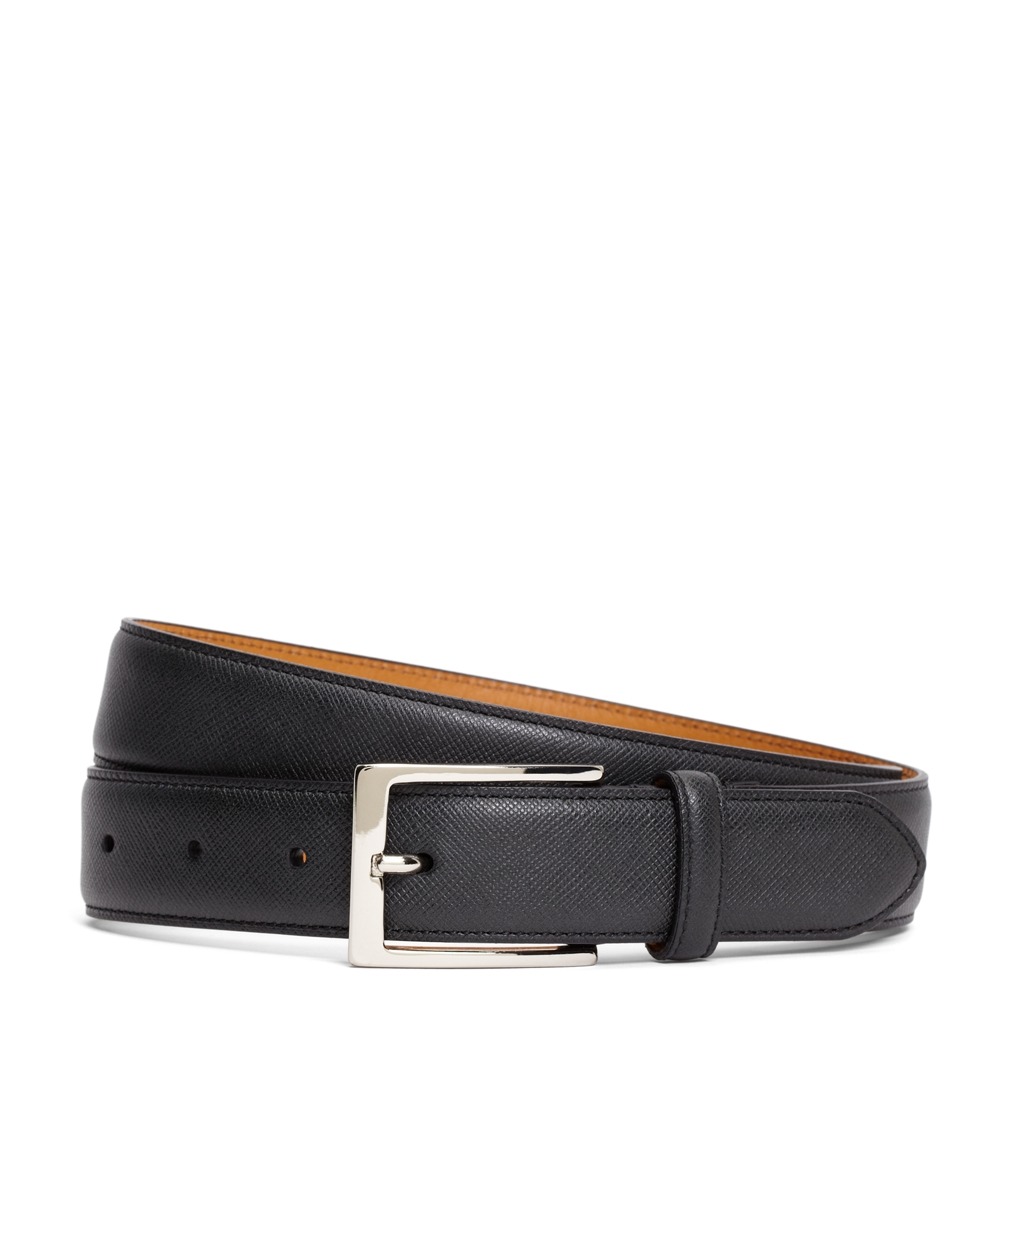 Saffiano Leather Belt | Blingby